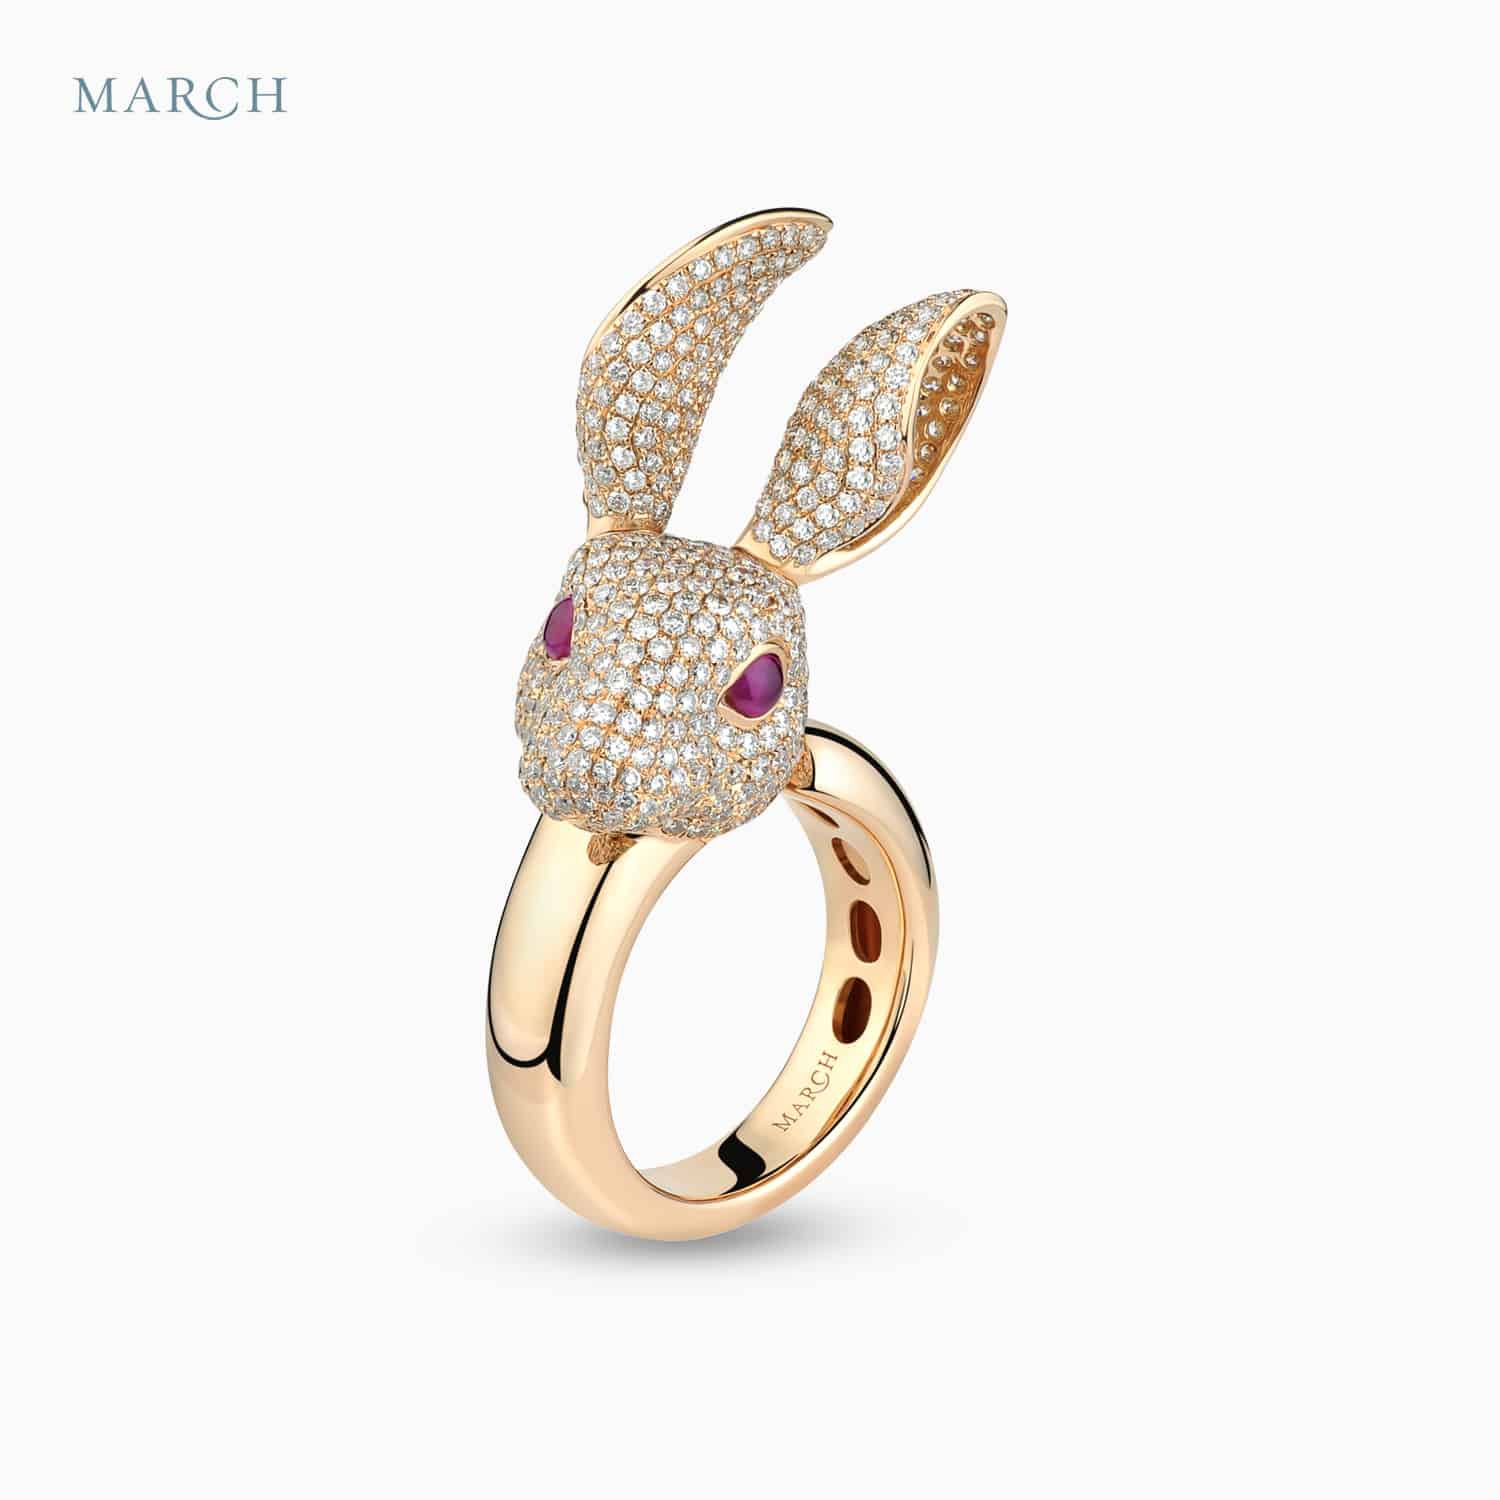 Rabbit Ring in 18K Rose Gold with Diamonds and Ruby • Forever Jewels